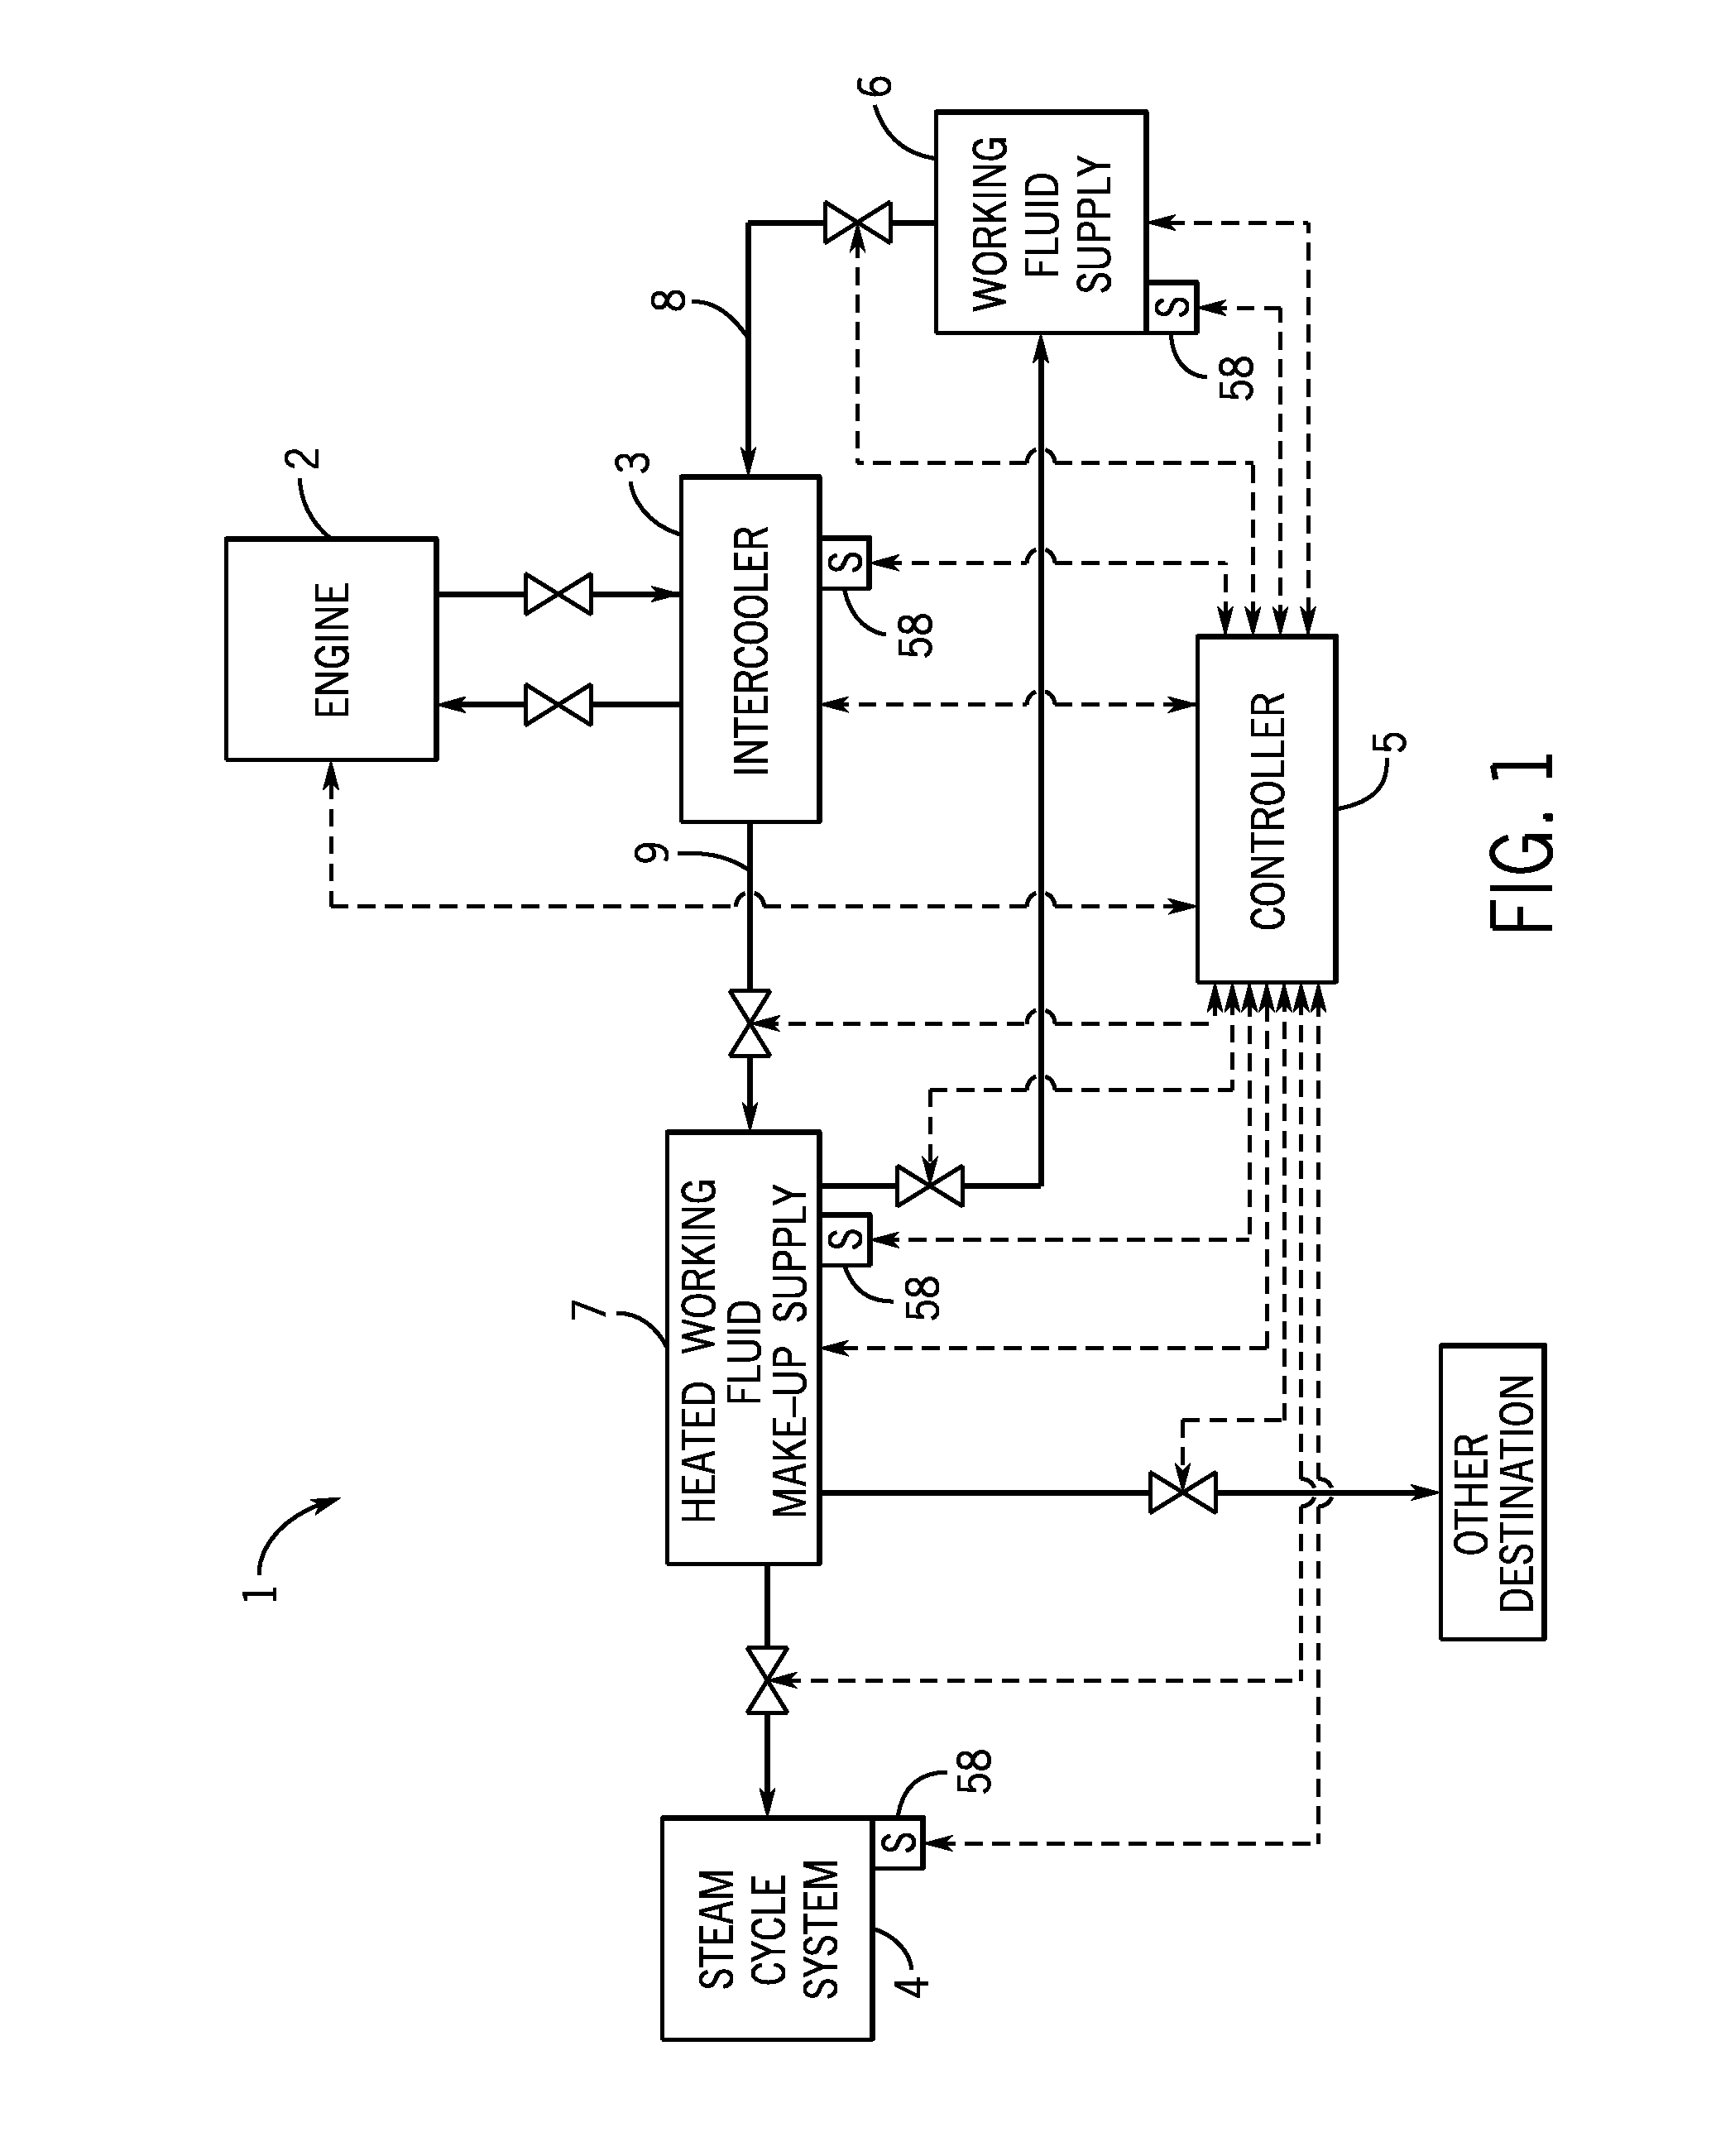 System and method for heating make-up working fluid of a steam system with engine fluid waste heat